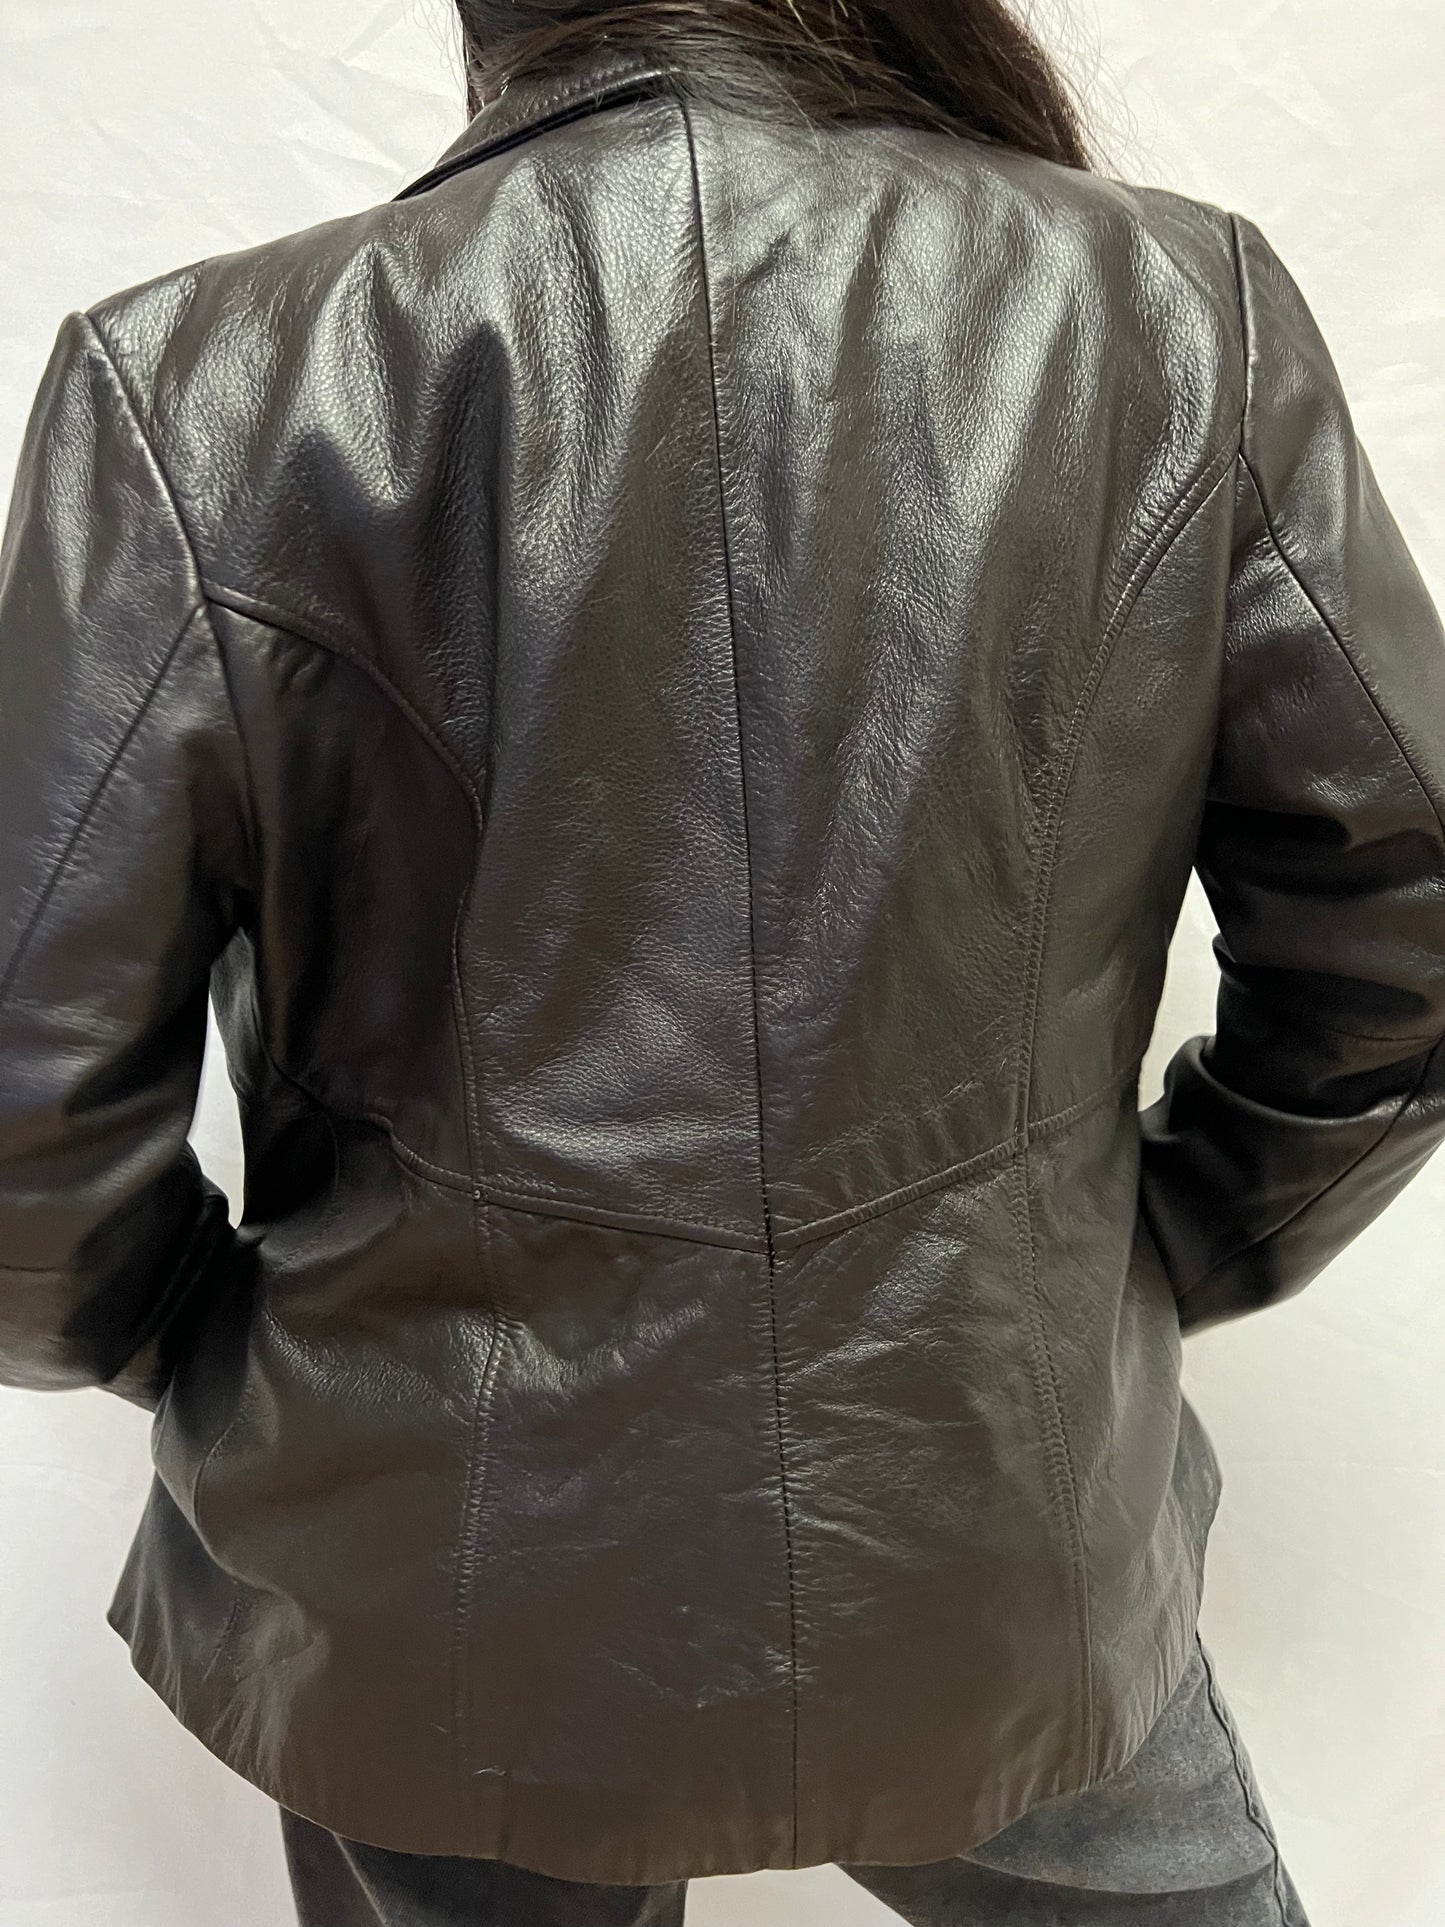 Wilsons Leather Jacket - L